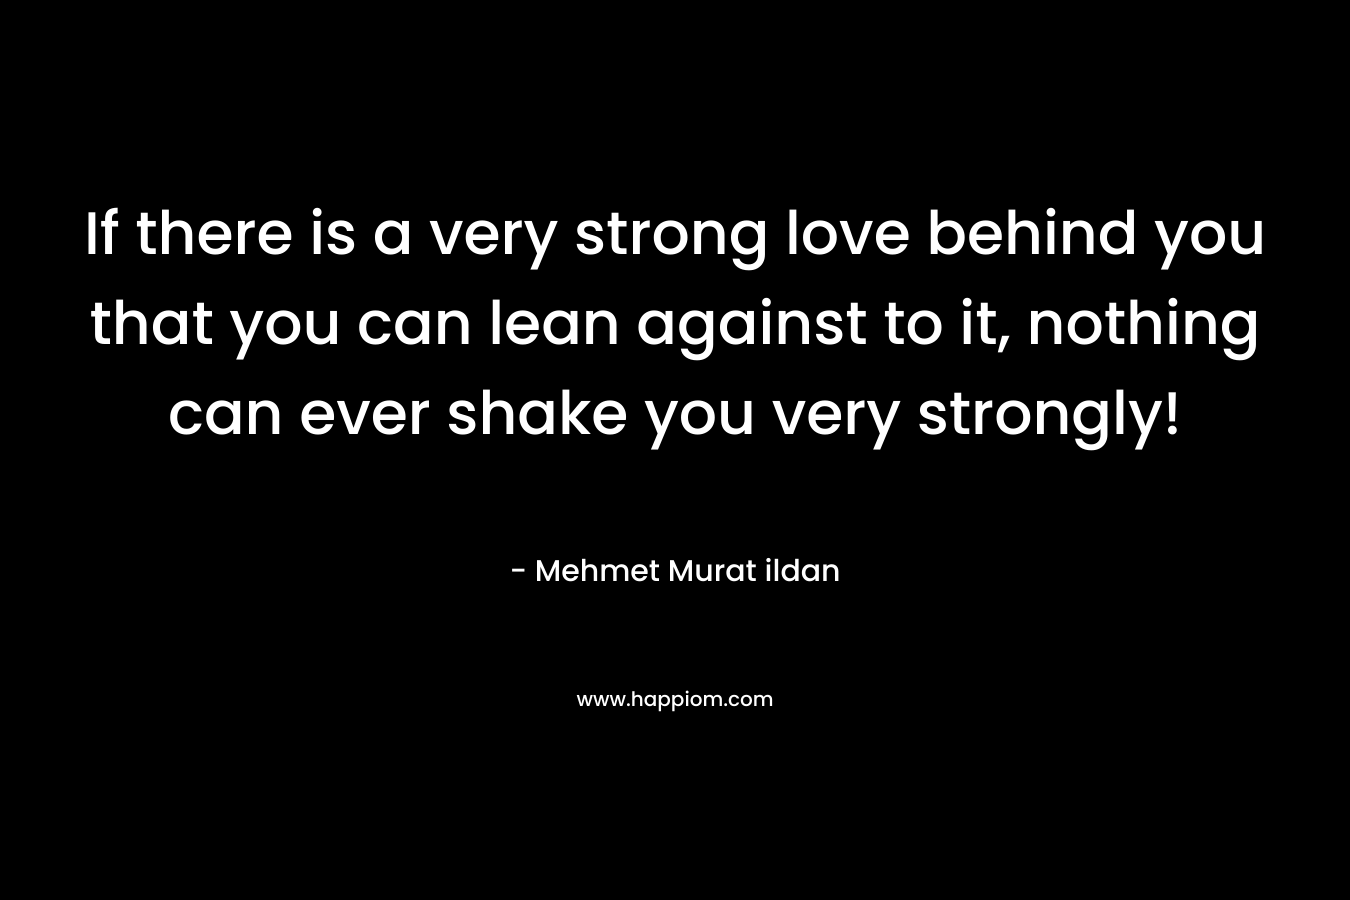 If there is a very strong love behind you that you can lean against to it, nothing can ever shake you very strongly!